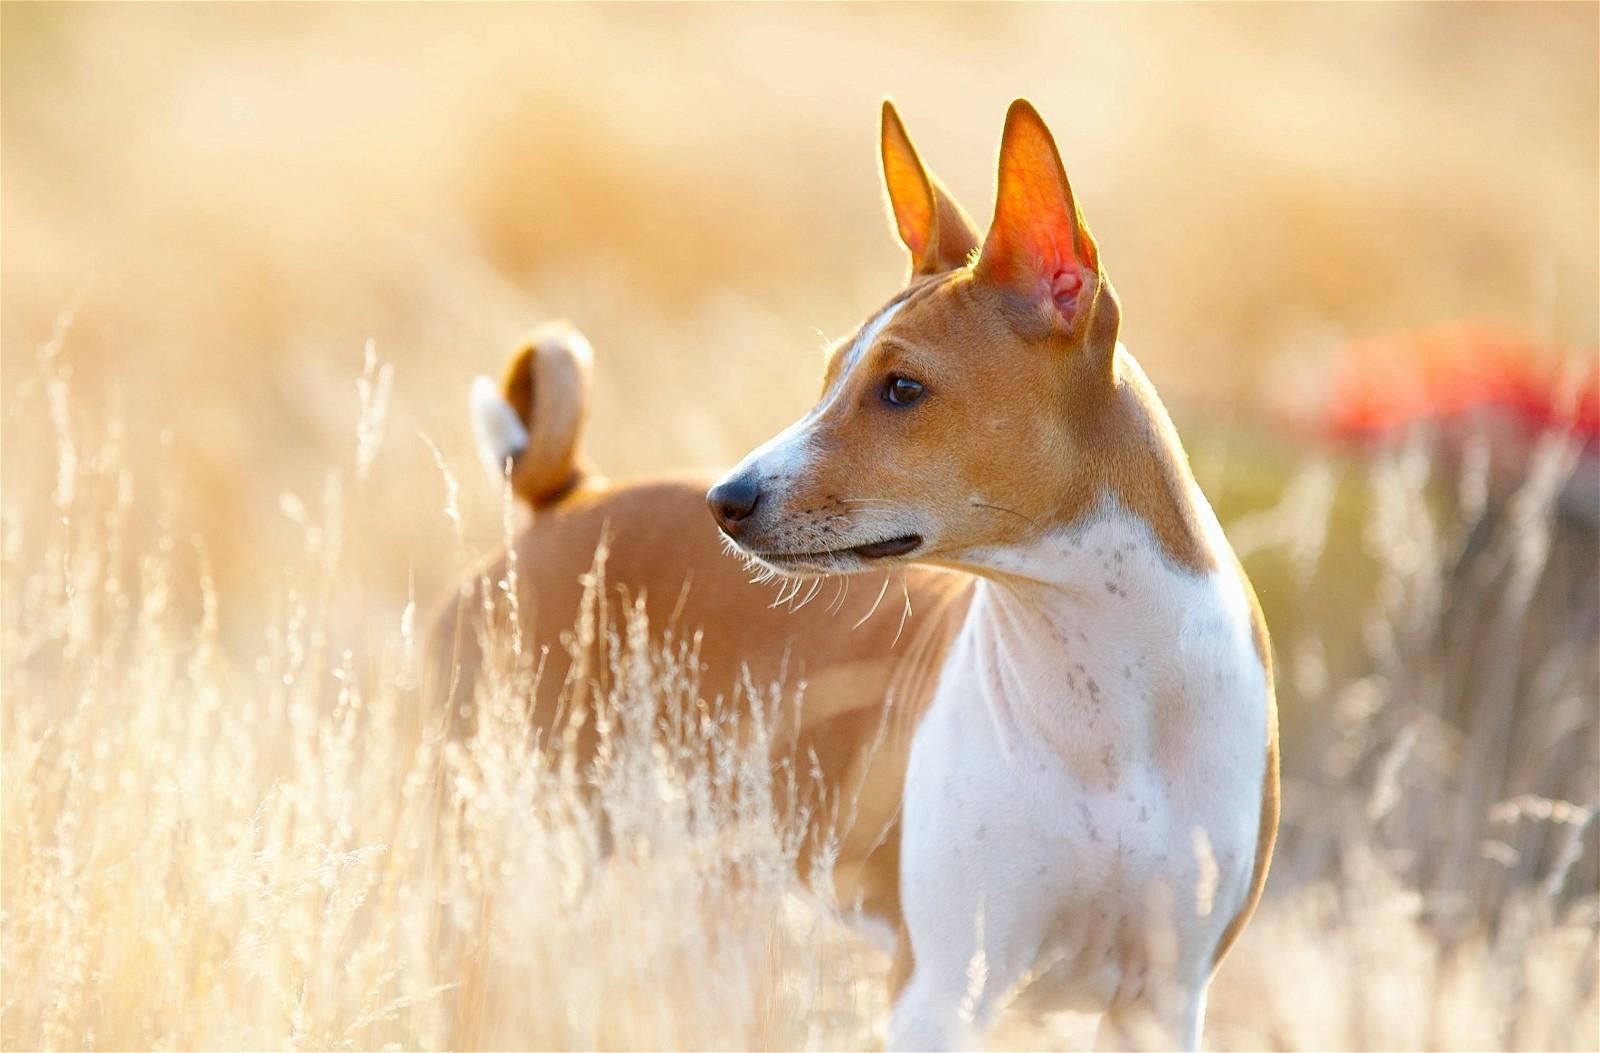 A brown and white dog with pointed ears stands in a field of tall grass.